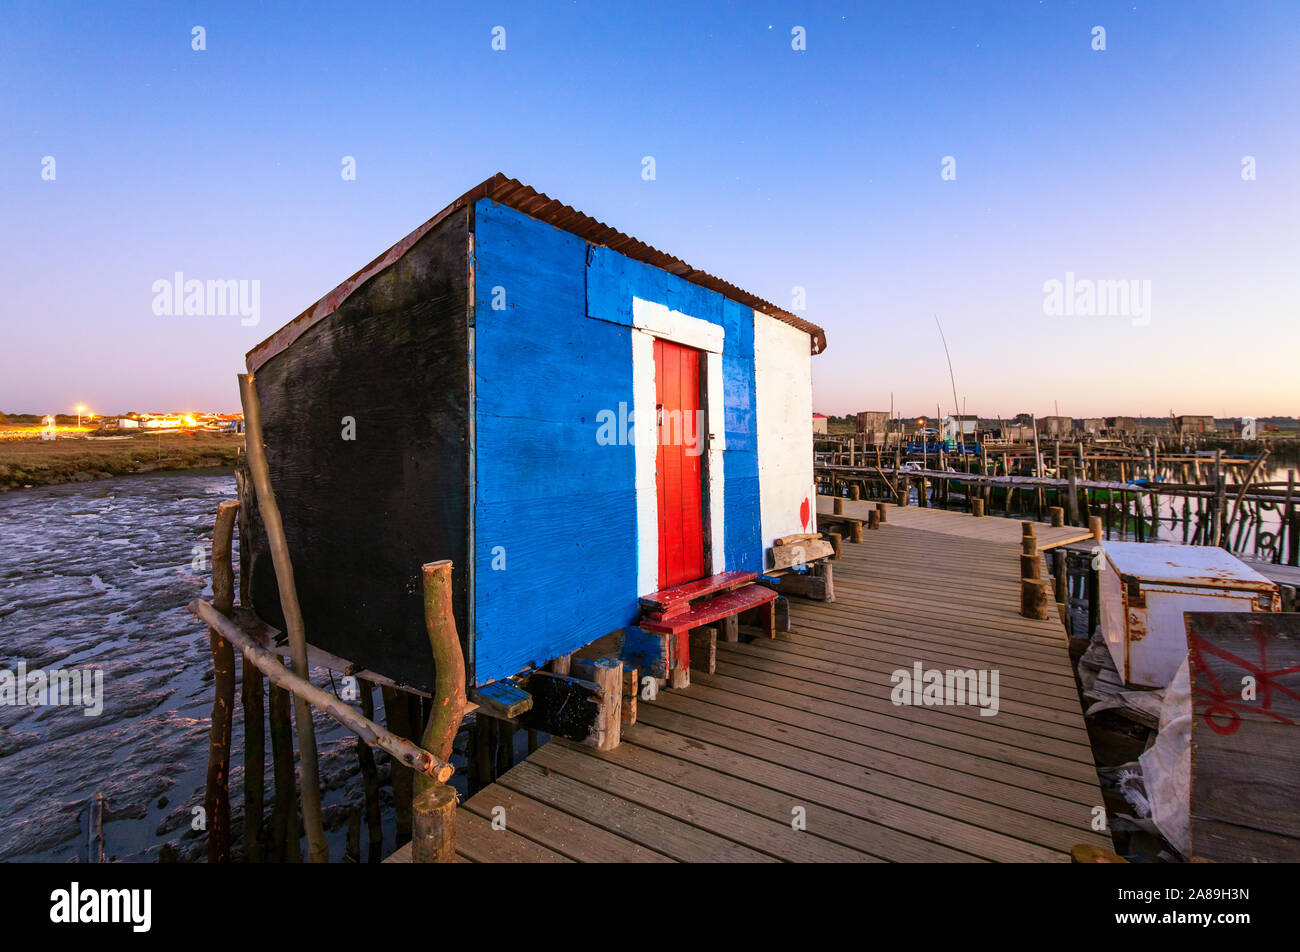 A fisherman hut on a wooden pillars pier, the palafite fishing harbour of Carrasqueira at dusk. Alentejo, Portugal Stock Photo